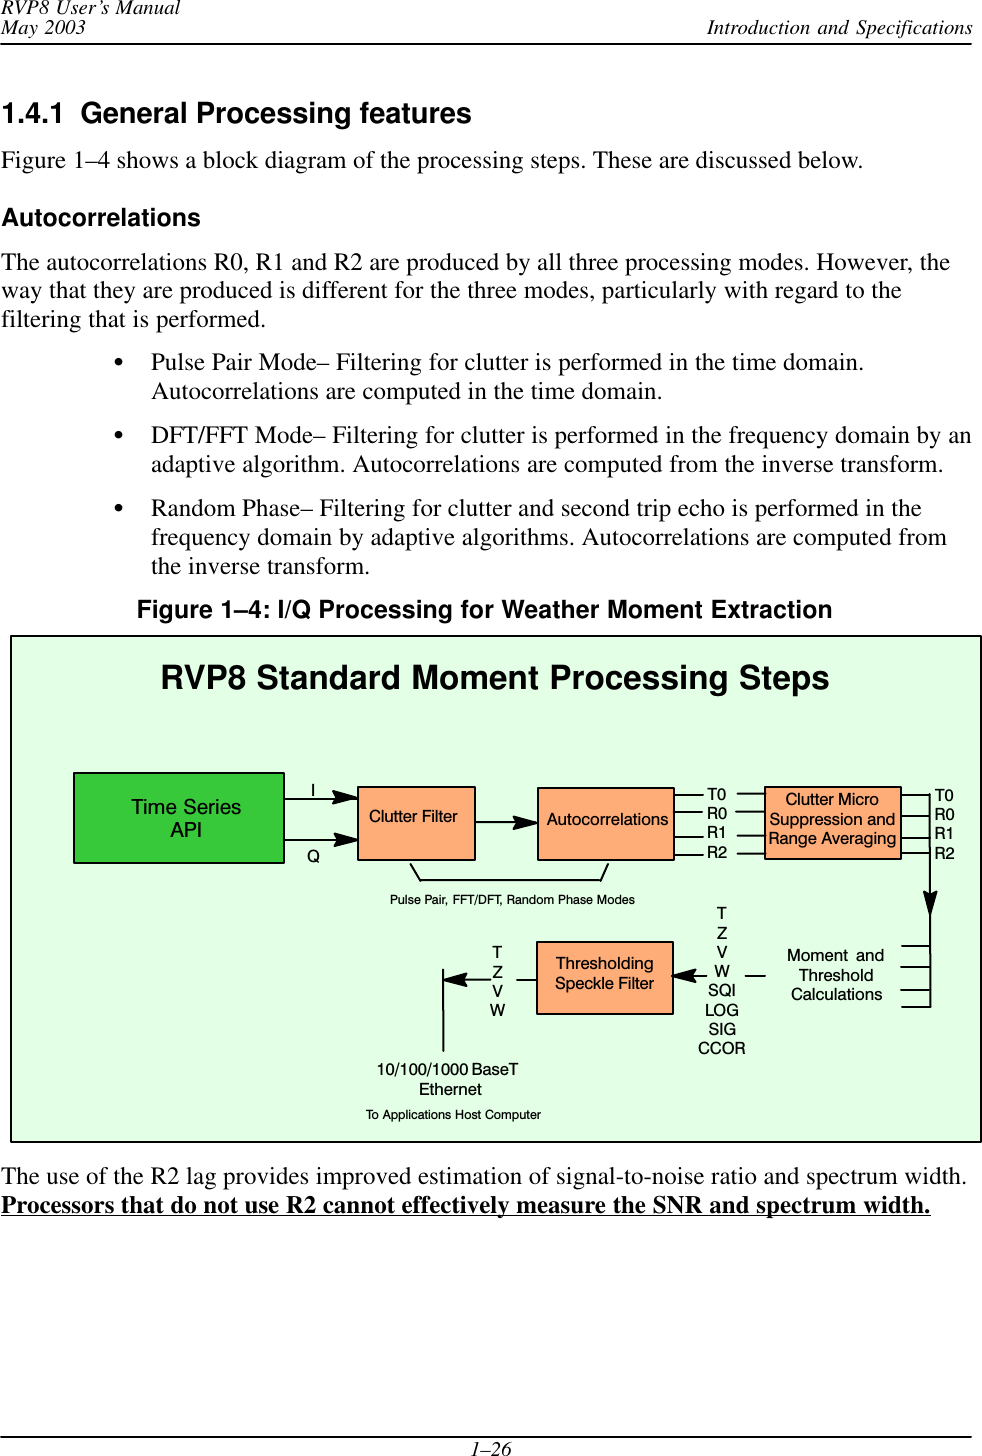 Introduction and SpecificationsRVP8 User’s ManualMay 20031–261.4.1  General Processing featuresFigure 1–4 shows a block diagram of the processing steps. These are discussed below.AutocorrelationsThe autocorrelations R0, R1 and R2 are produced by all three processing modes. However, theway that they are produced is different for the three modes, particularly with regard to thefiltering that is performed.Pulse Pair Mode– Filtering for clutter is performed in the time domain.Autocorrelations are computed in the time domain.DFT/FFT Mode– Filtering for clutter is performed in the frequency domain by anadaptive algorithm. Autocorrelations are computed from the inverse transform.Random Phase– Filtering for clutter and second trip echo is performed in thefrequency domain by adaptive algorithms. Autocorrelations are computed fromthe inverse transform.Figure 1–4: I/Q Processing for Weather Moment Extraction Moment  andThresholdCalculationsClutter FilterIQAutocorrelationsRVP8 Standard Moment Processing StepsClutter MicroSuppression andRange AveragingThresholdingSpeckle FilterTZVWSQILOGSIGCCORT0R0R1R2T0R0R1R2TZVWPulse Pair, FFT/DFT, Random Phase Modes10/100/1000 BaseT EthernetTo Applications Host ComputerTime SeriesAPIThe use of the R2 lag provides improved estimation of signal-to-noise ratio and spectrum width.Processors that do not use R2 cannot effectively measure the SNR and spectrum width.